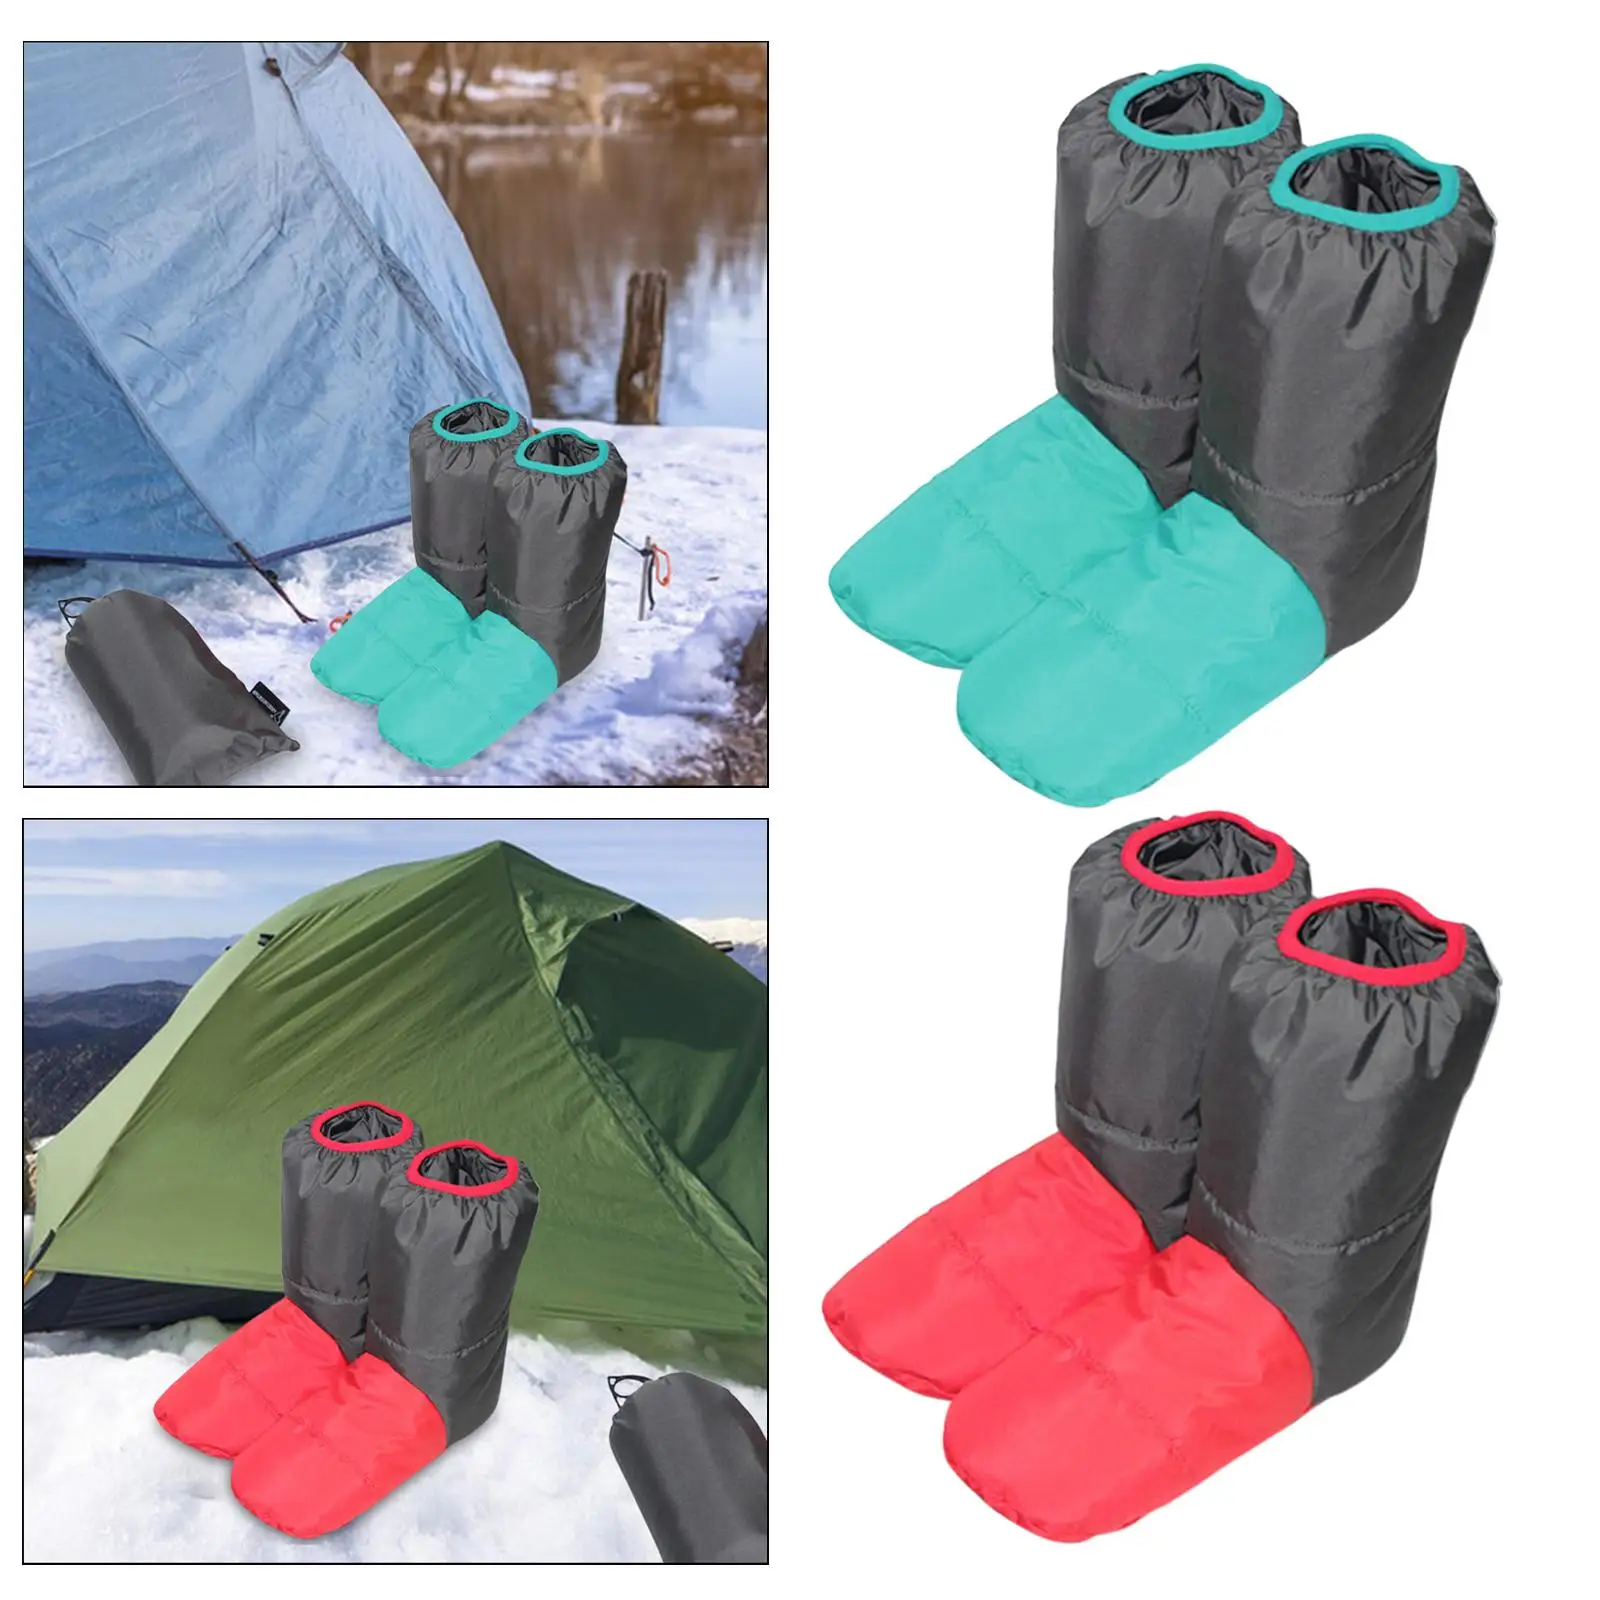 Down Booties Portable with Storage Bag Cozy Sleeping Sock Breathable Soft Warm Socks for Camping Backpacking Sleeping Bag